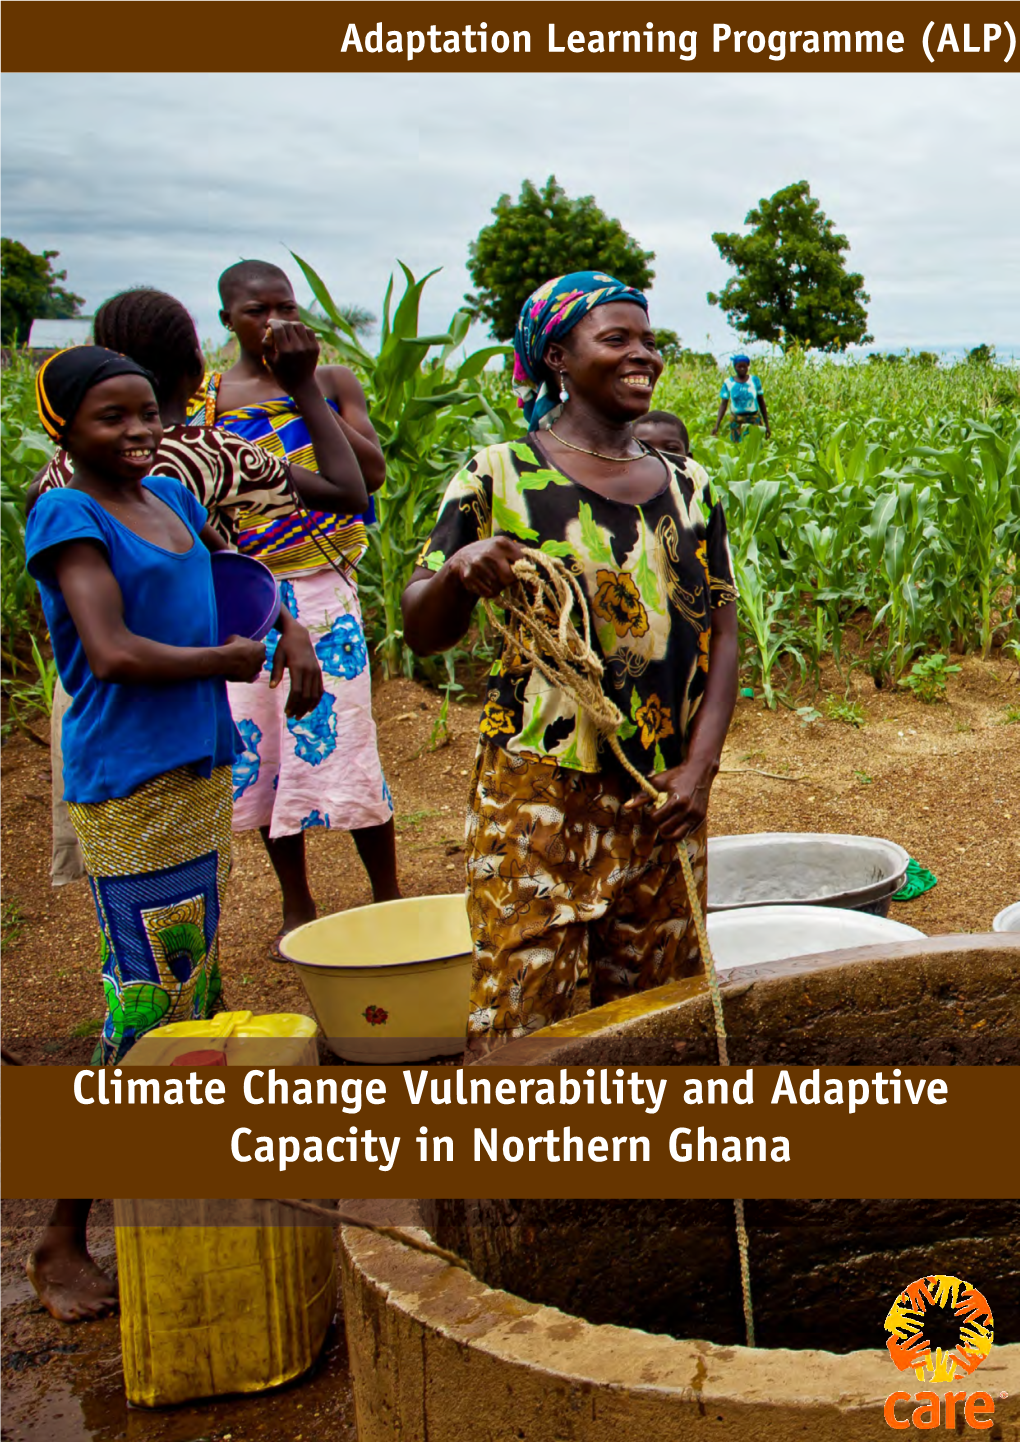 Climate Change Vulnerability and Adaptive Capacity in Northern Ghana